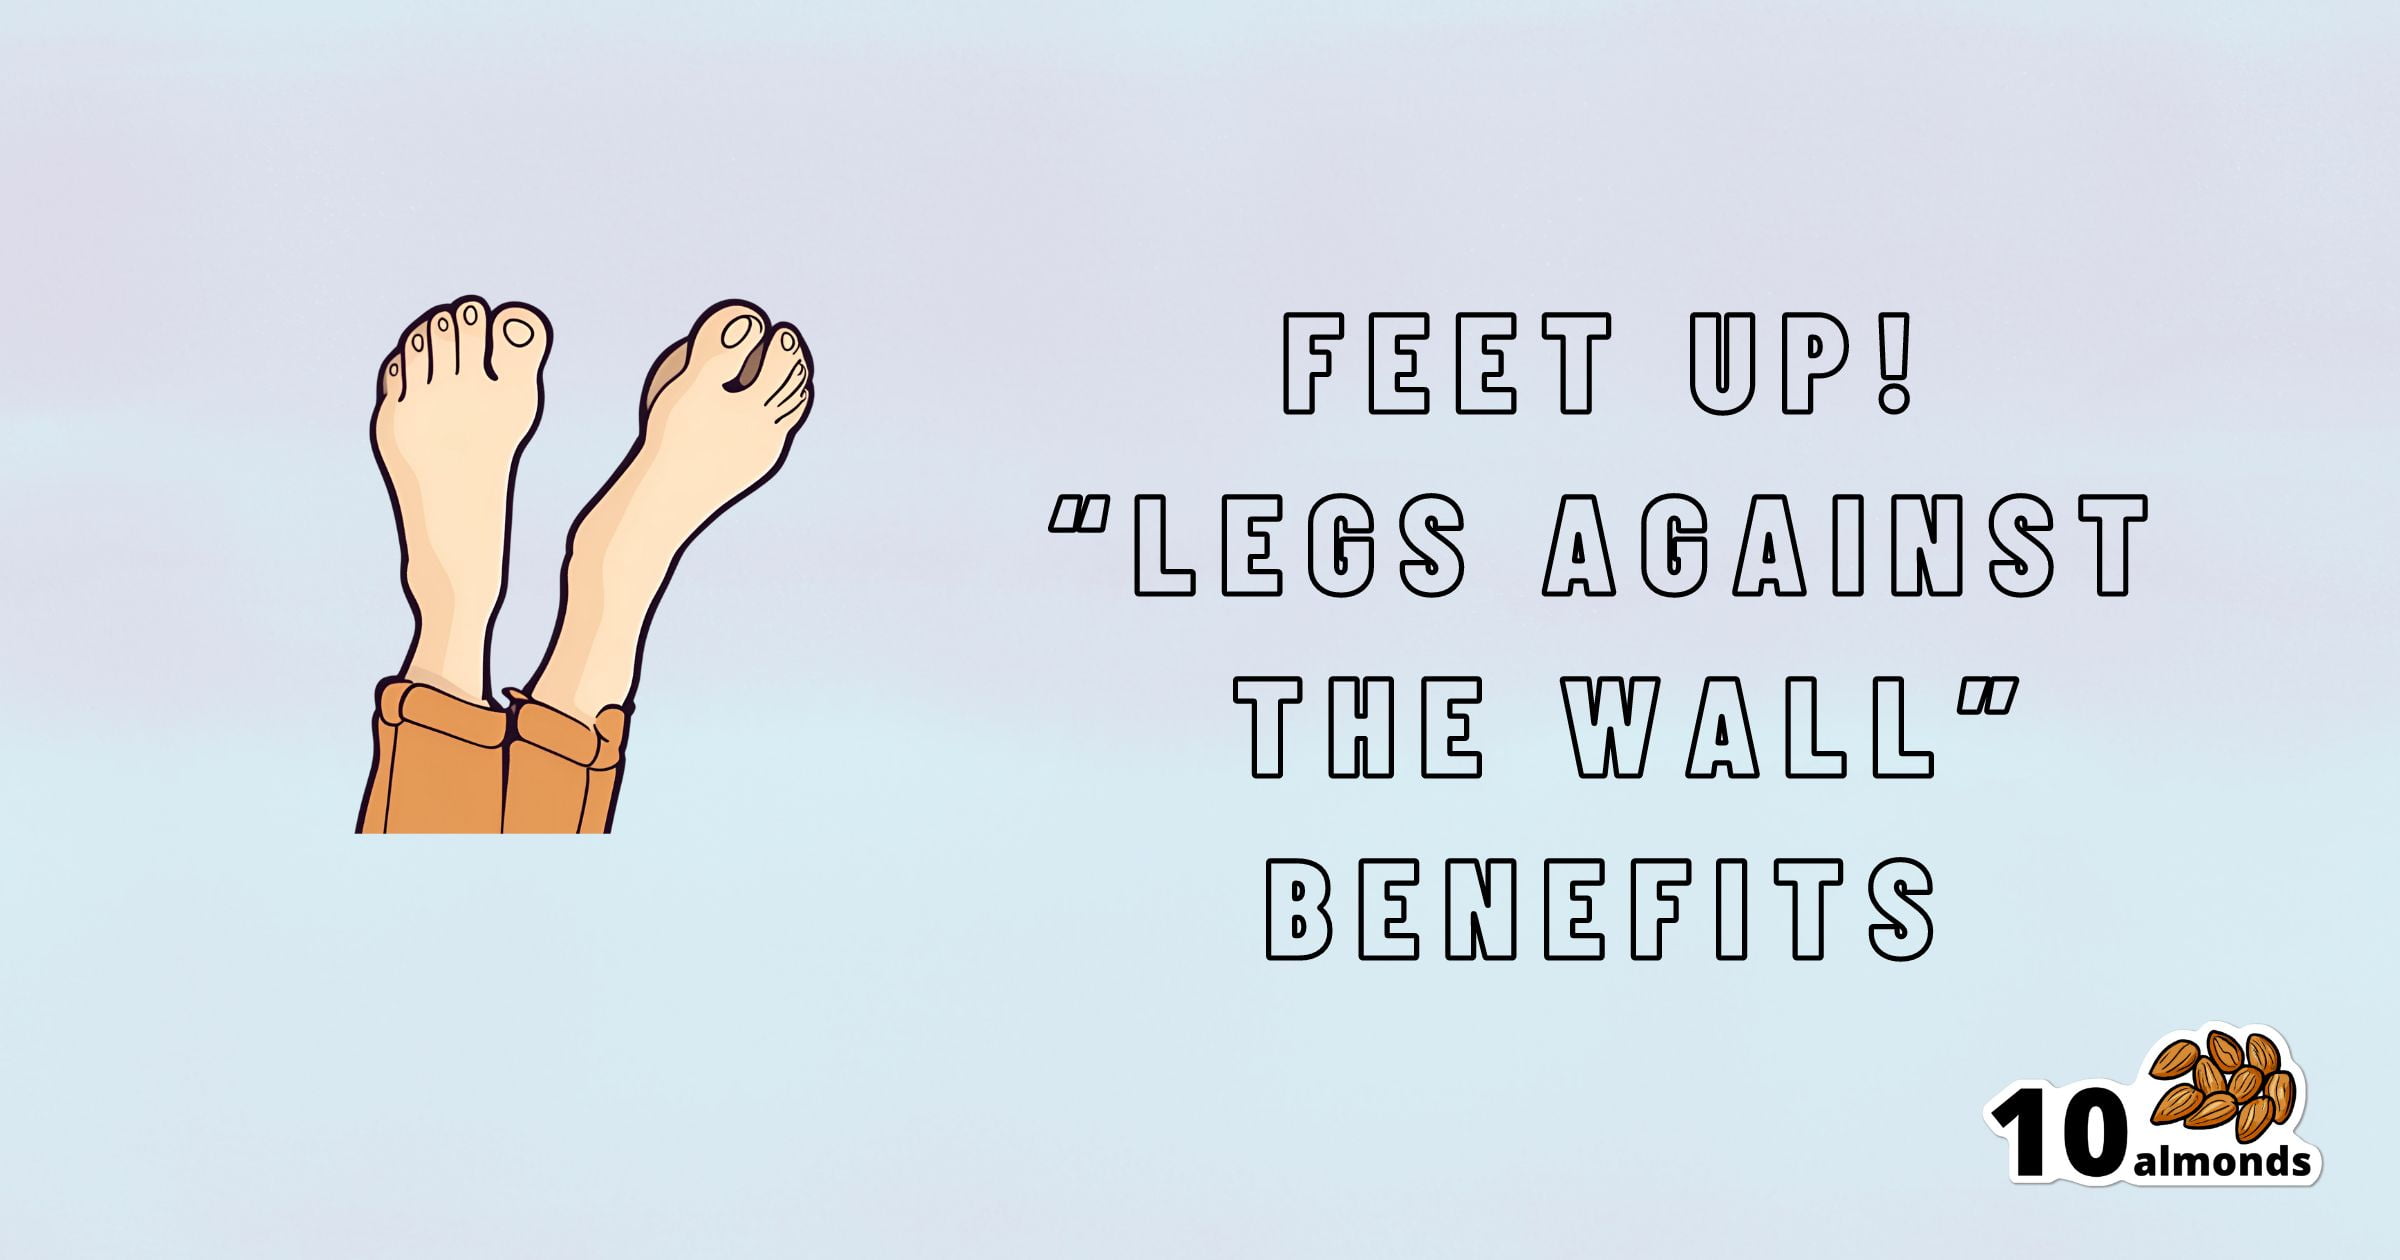 An illustration of legs with feet up against a light blue background, accompanied by text that reads, "Feet up! 'Legs against the wall' benefits in 20 minutes," and a small image of 10 almonds in the bottom right corner.